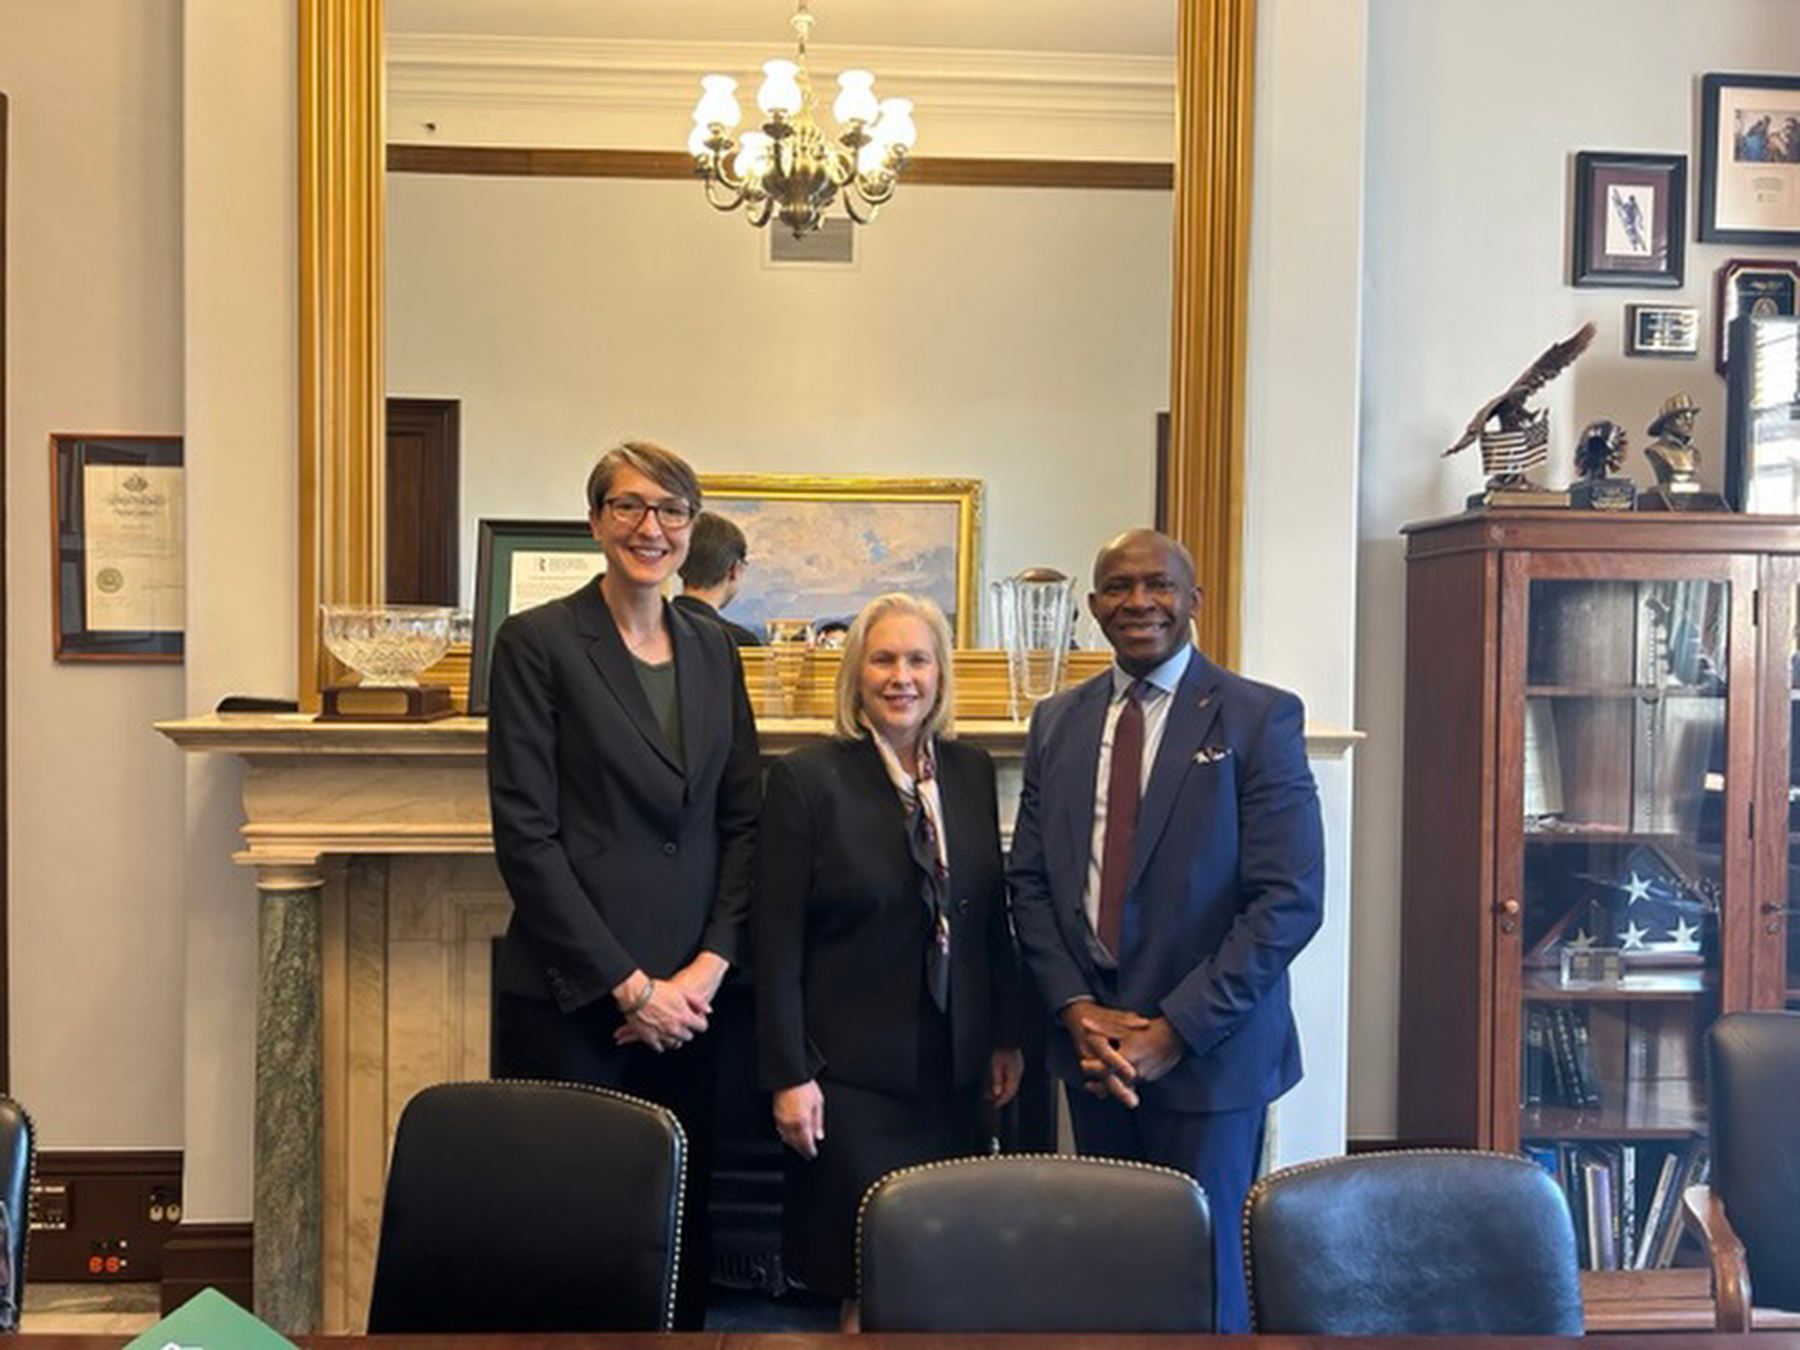 During SUNY D.C. Day, SUNY Oswego President Peter O. Nwosu and Assistant Vice President of Workforce Innovation and External Relations Kristi Eck met with representatives including U.S. Senator Kirsten Gillibrand.